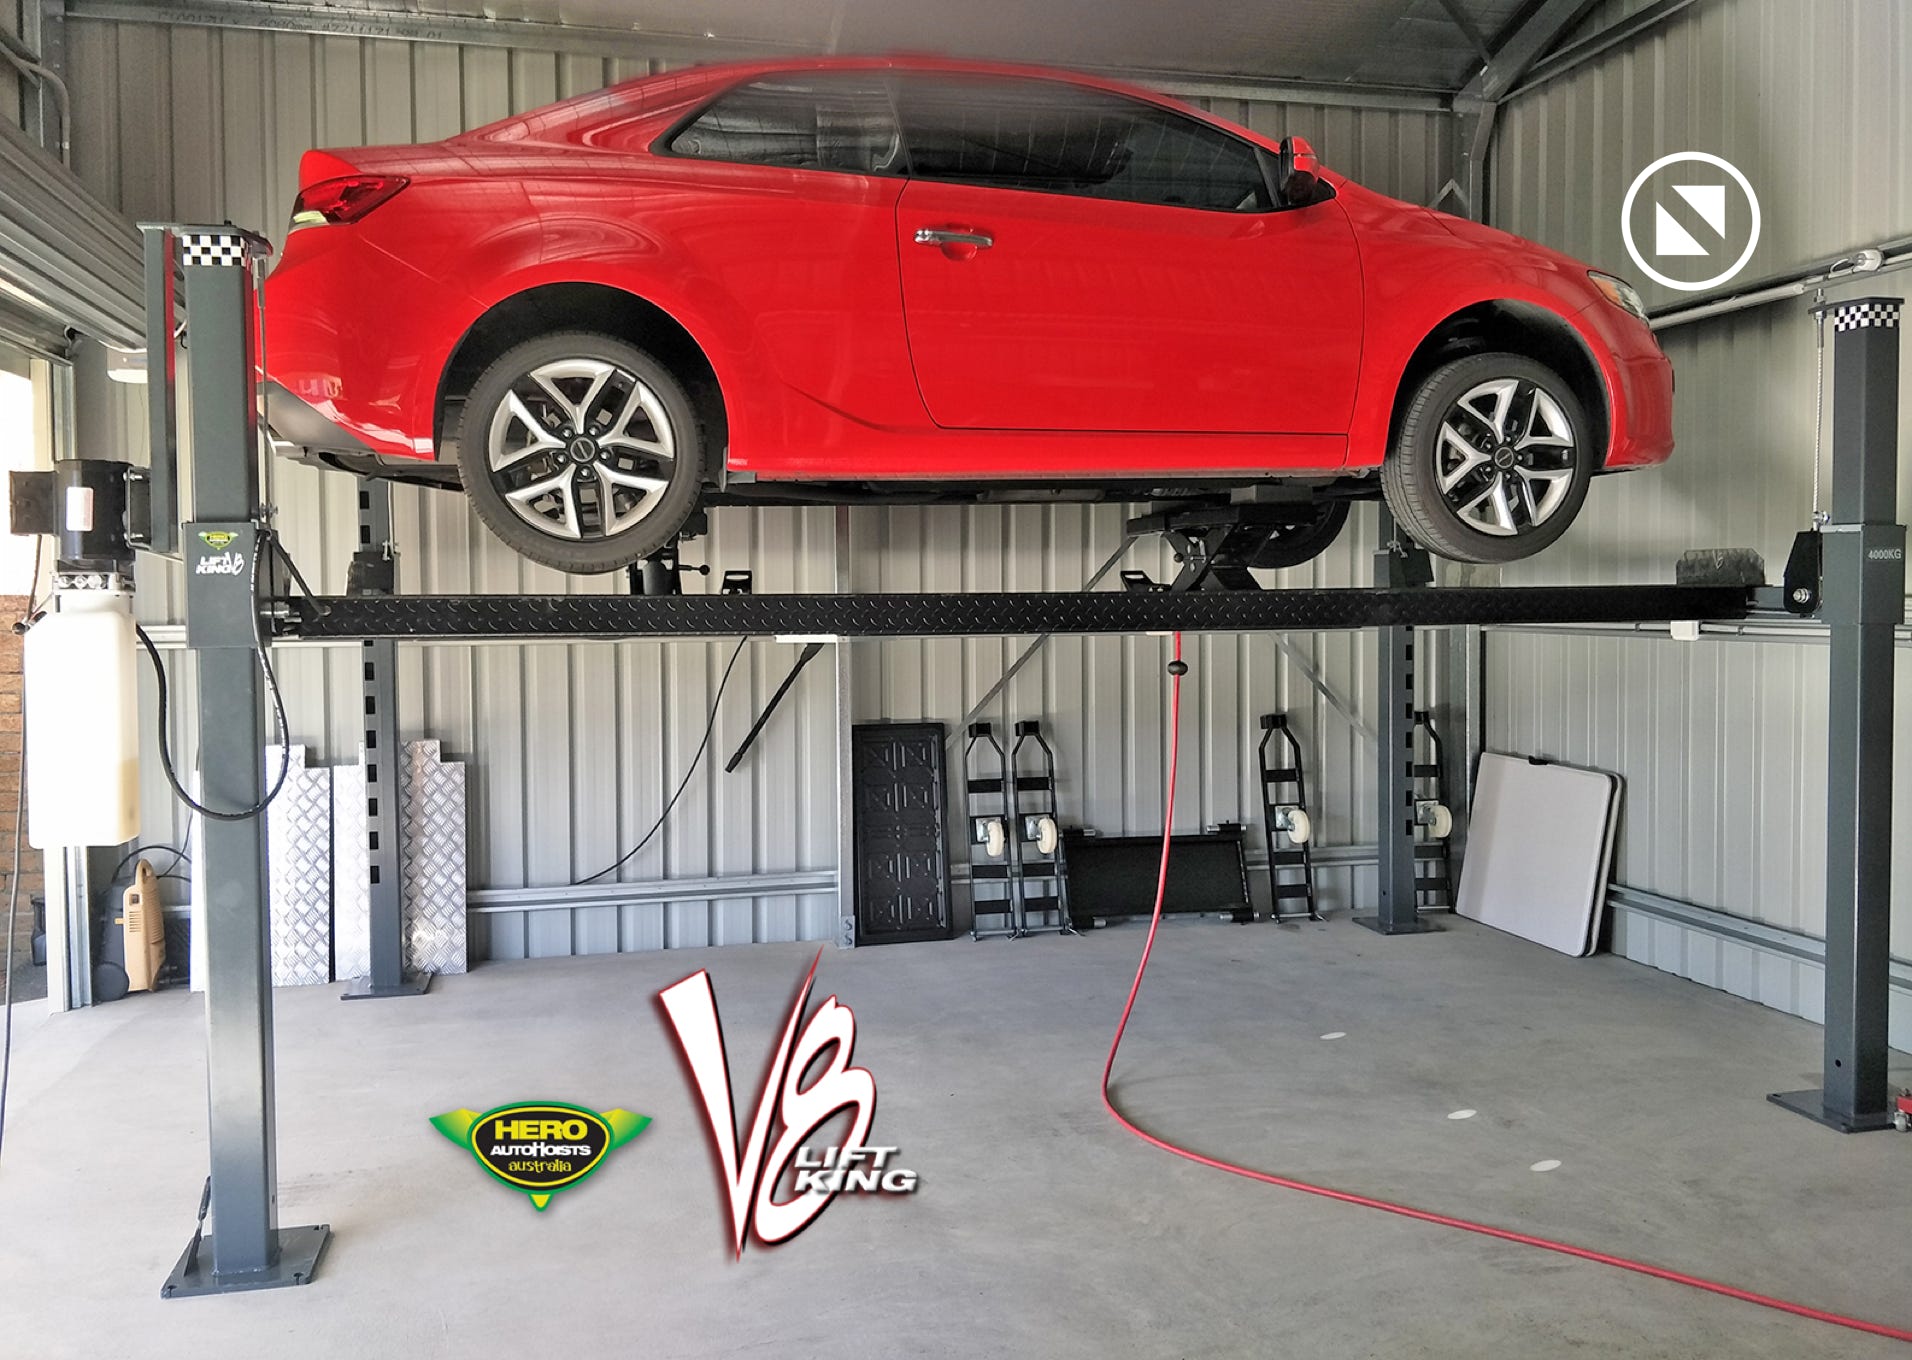 Lift King V8 with 2 Jacking Beams allows easy, safe wheels-free servicing...